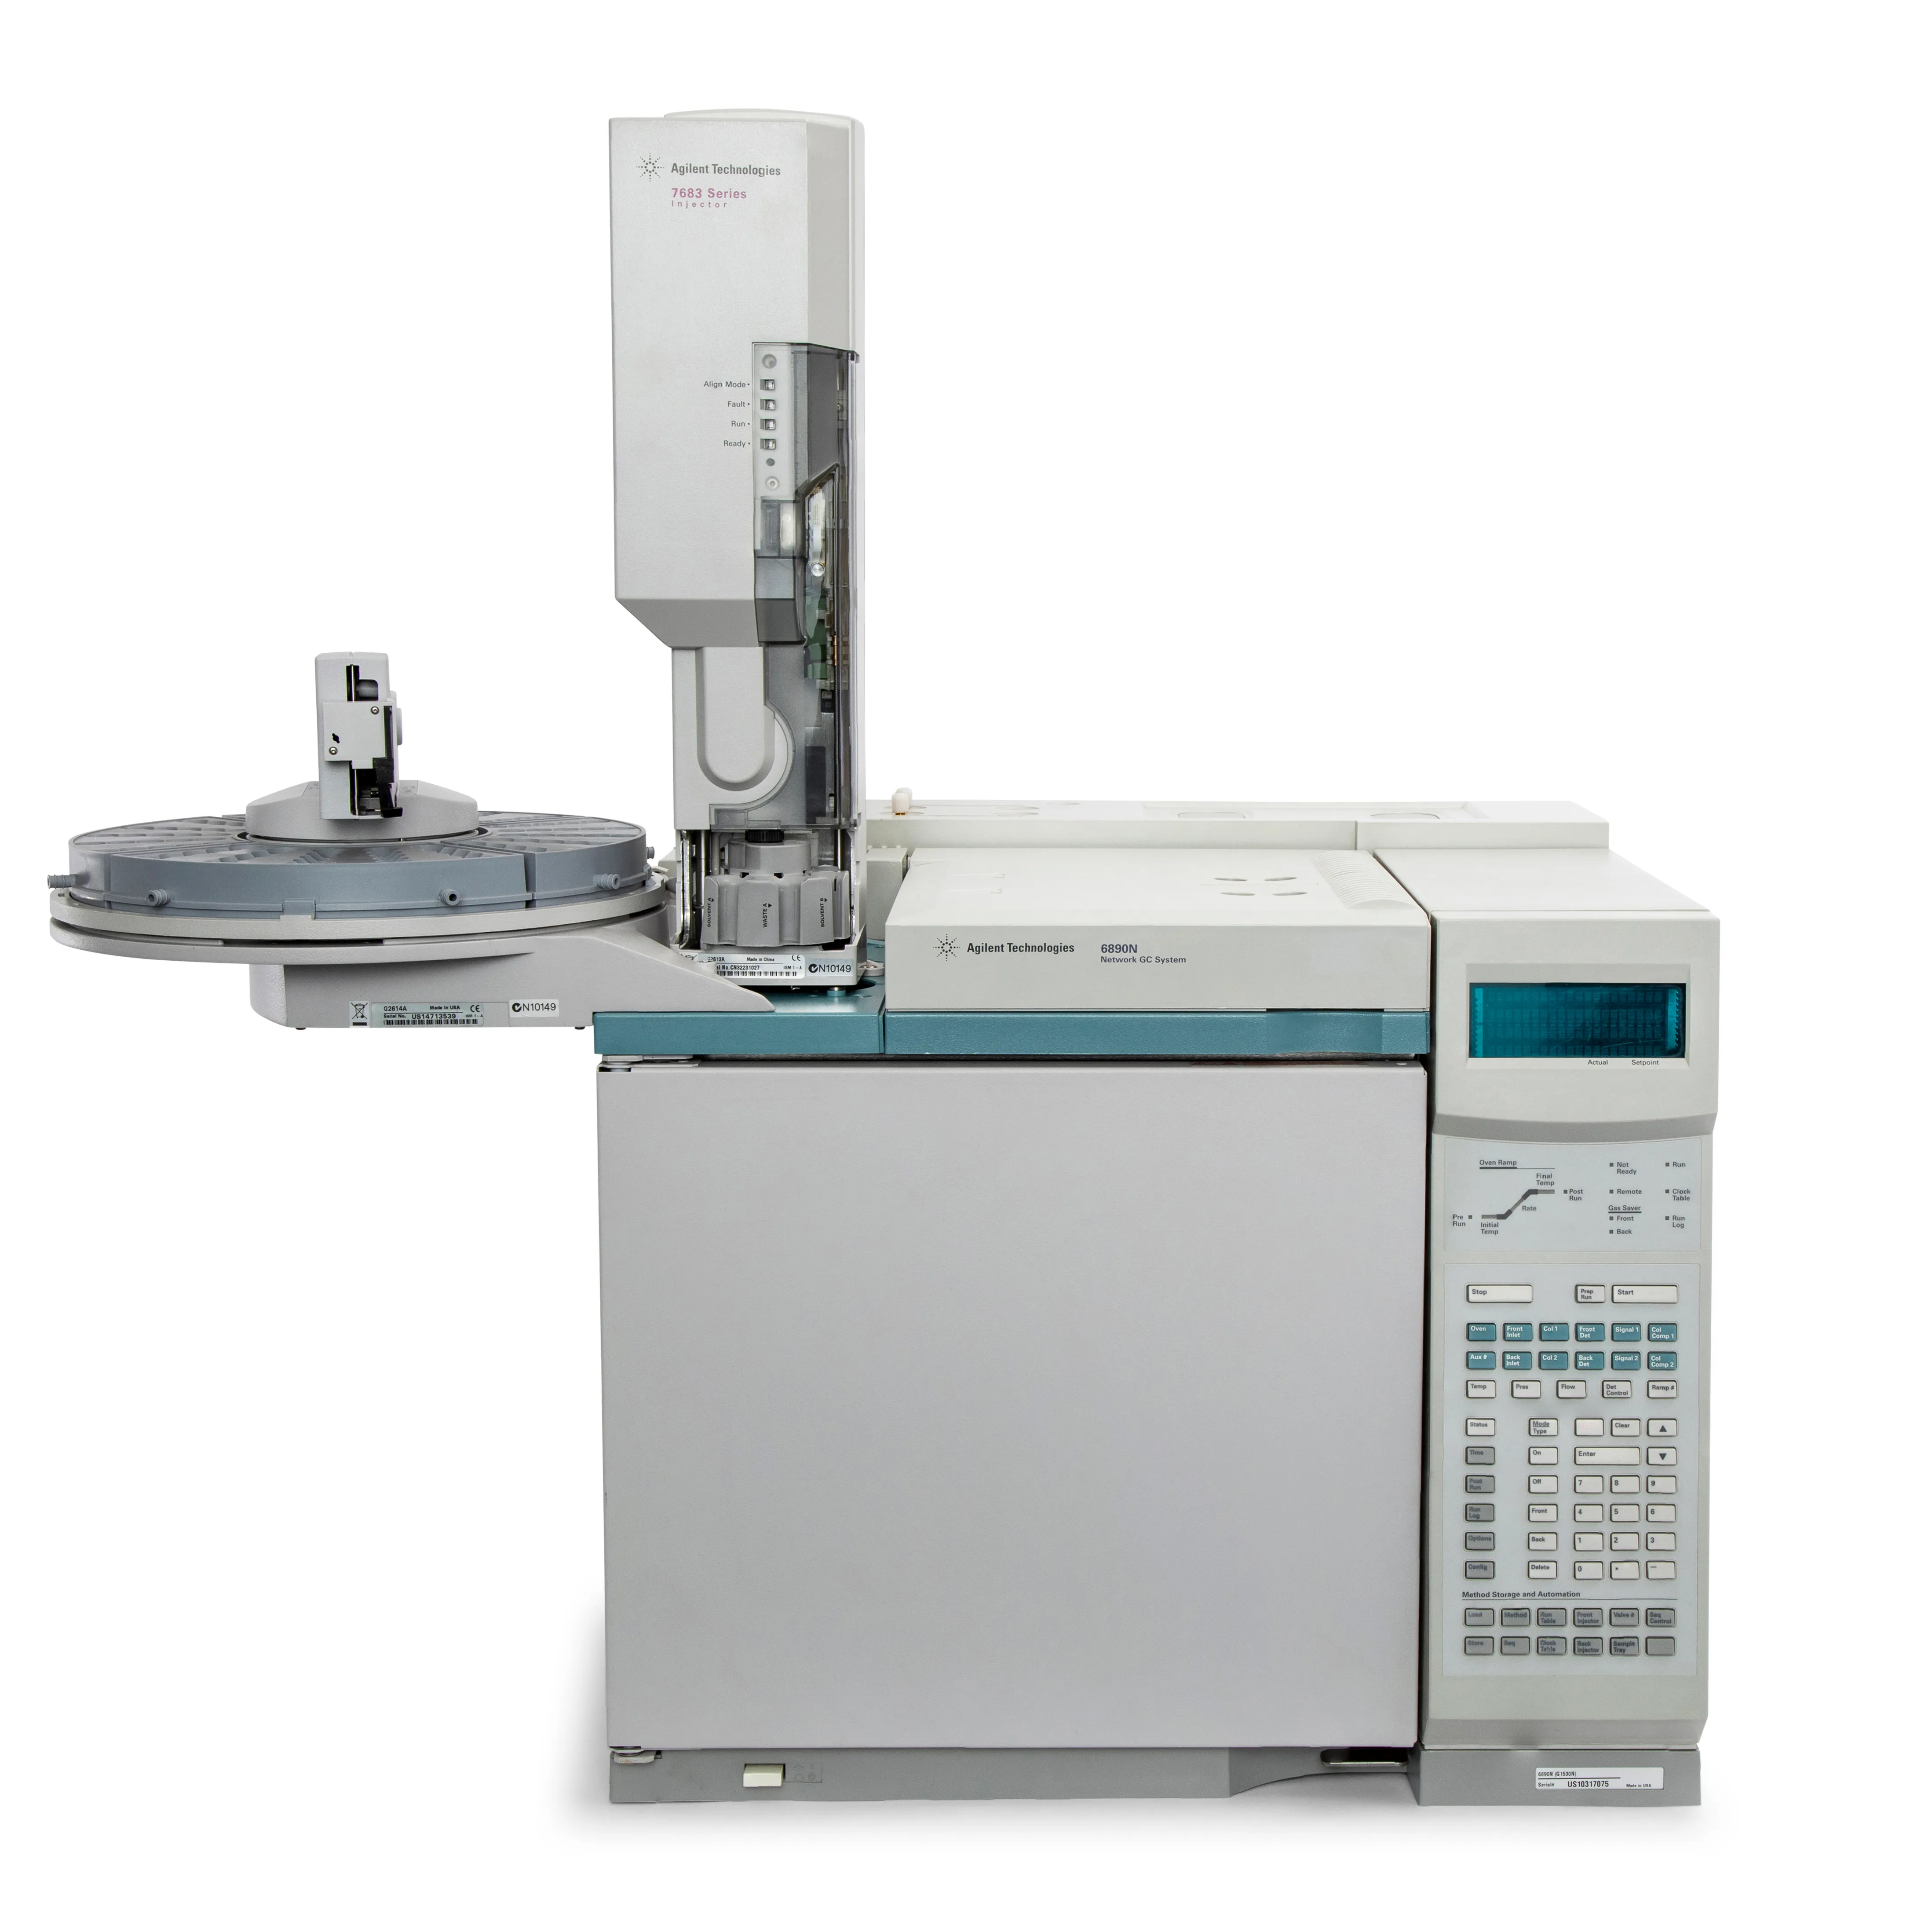 Agilent Certified Pre-Owned 6890N GC System